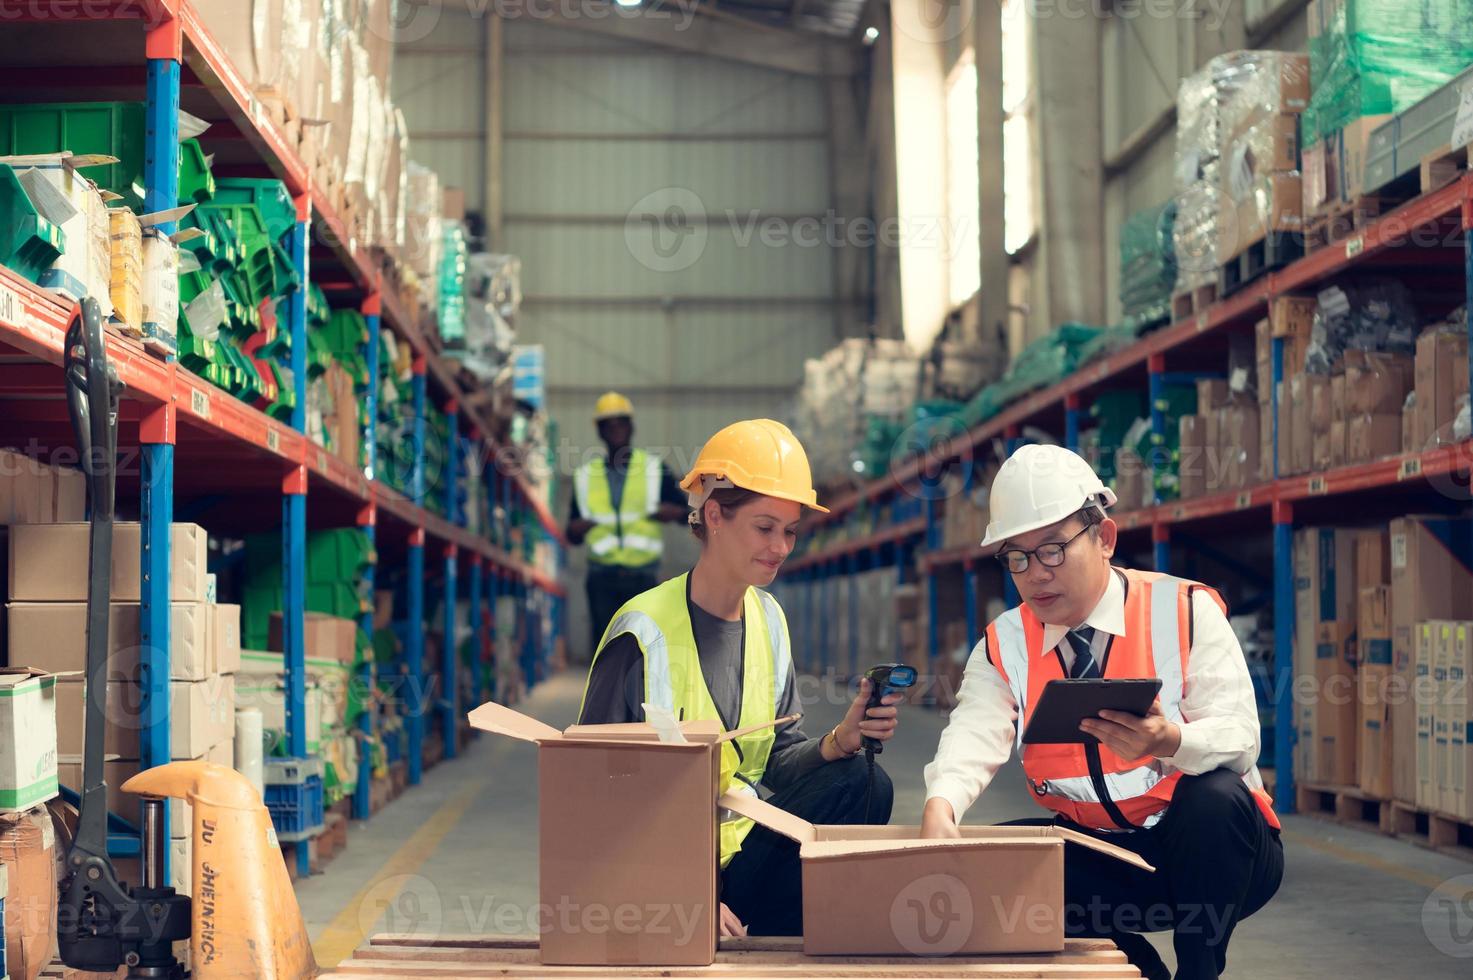 Before exporting to other nations, The product owner meets with the foreman and warehouse personnel to verify their own items held at this warehouse. photo